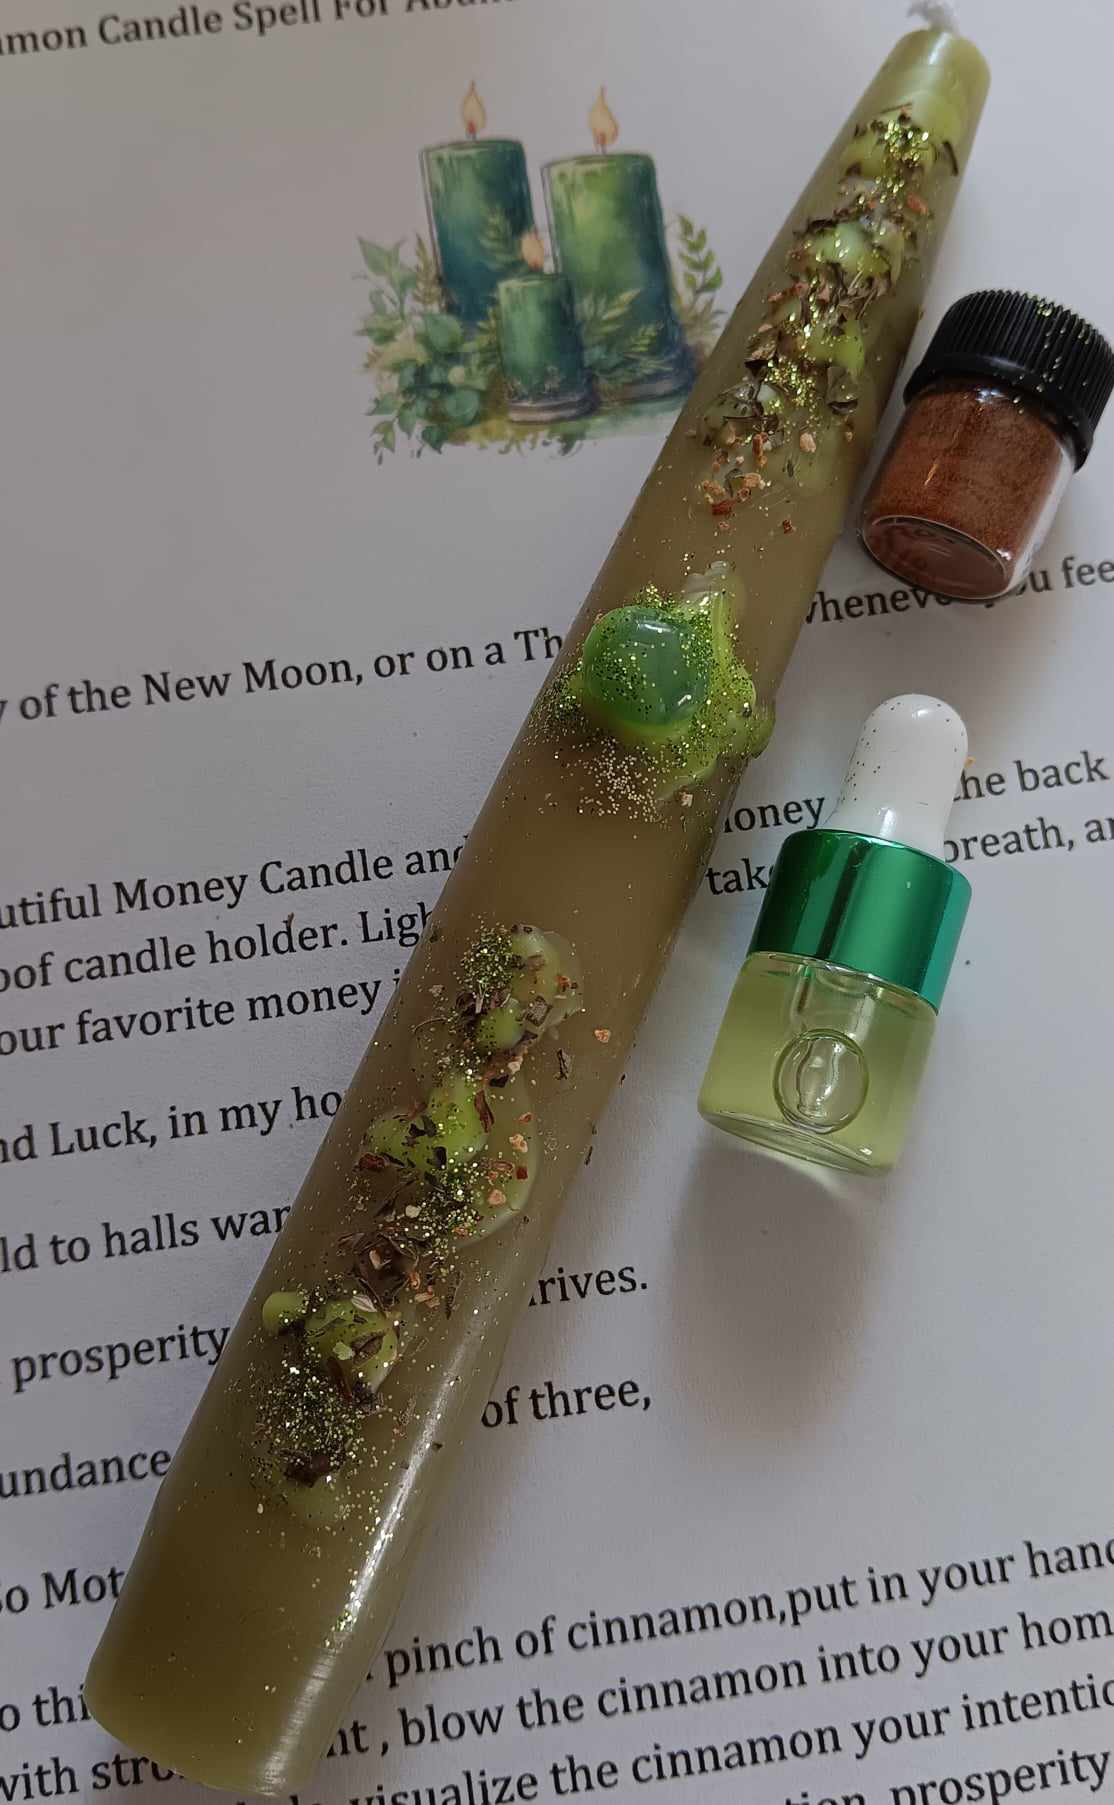 Enchanted Money Candle Spell Kit